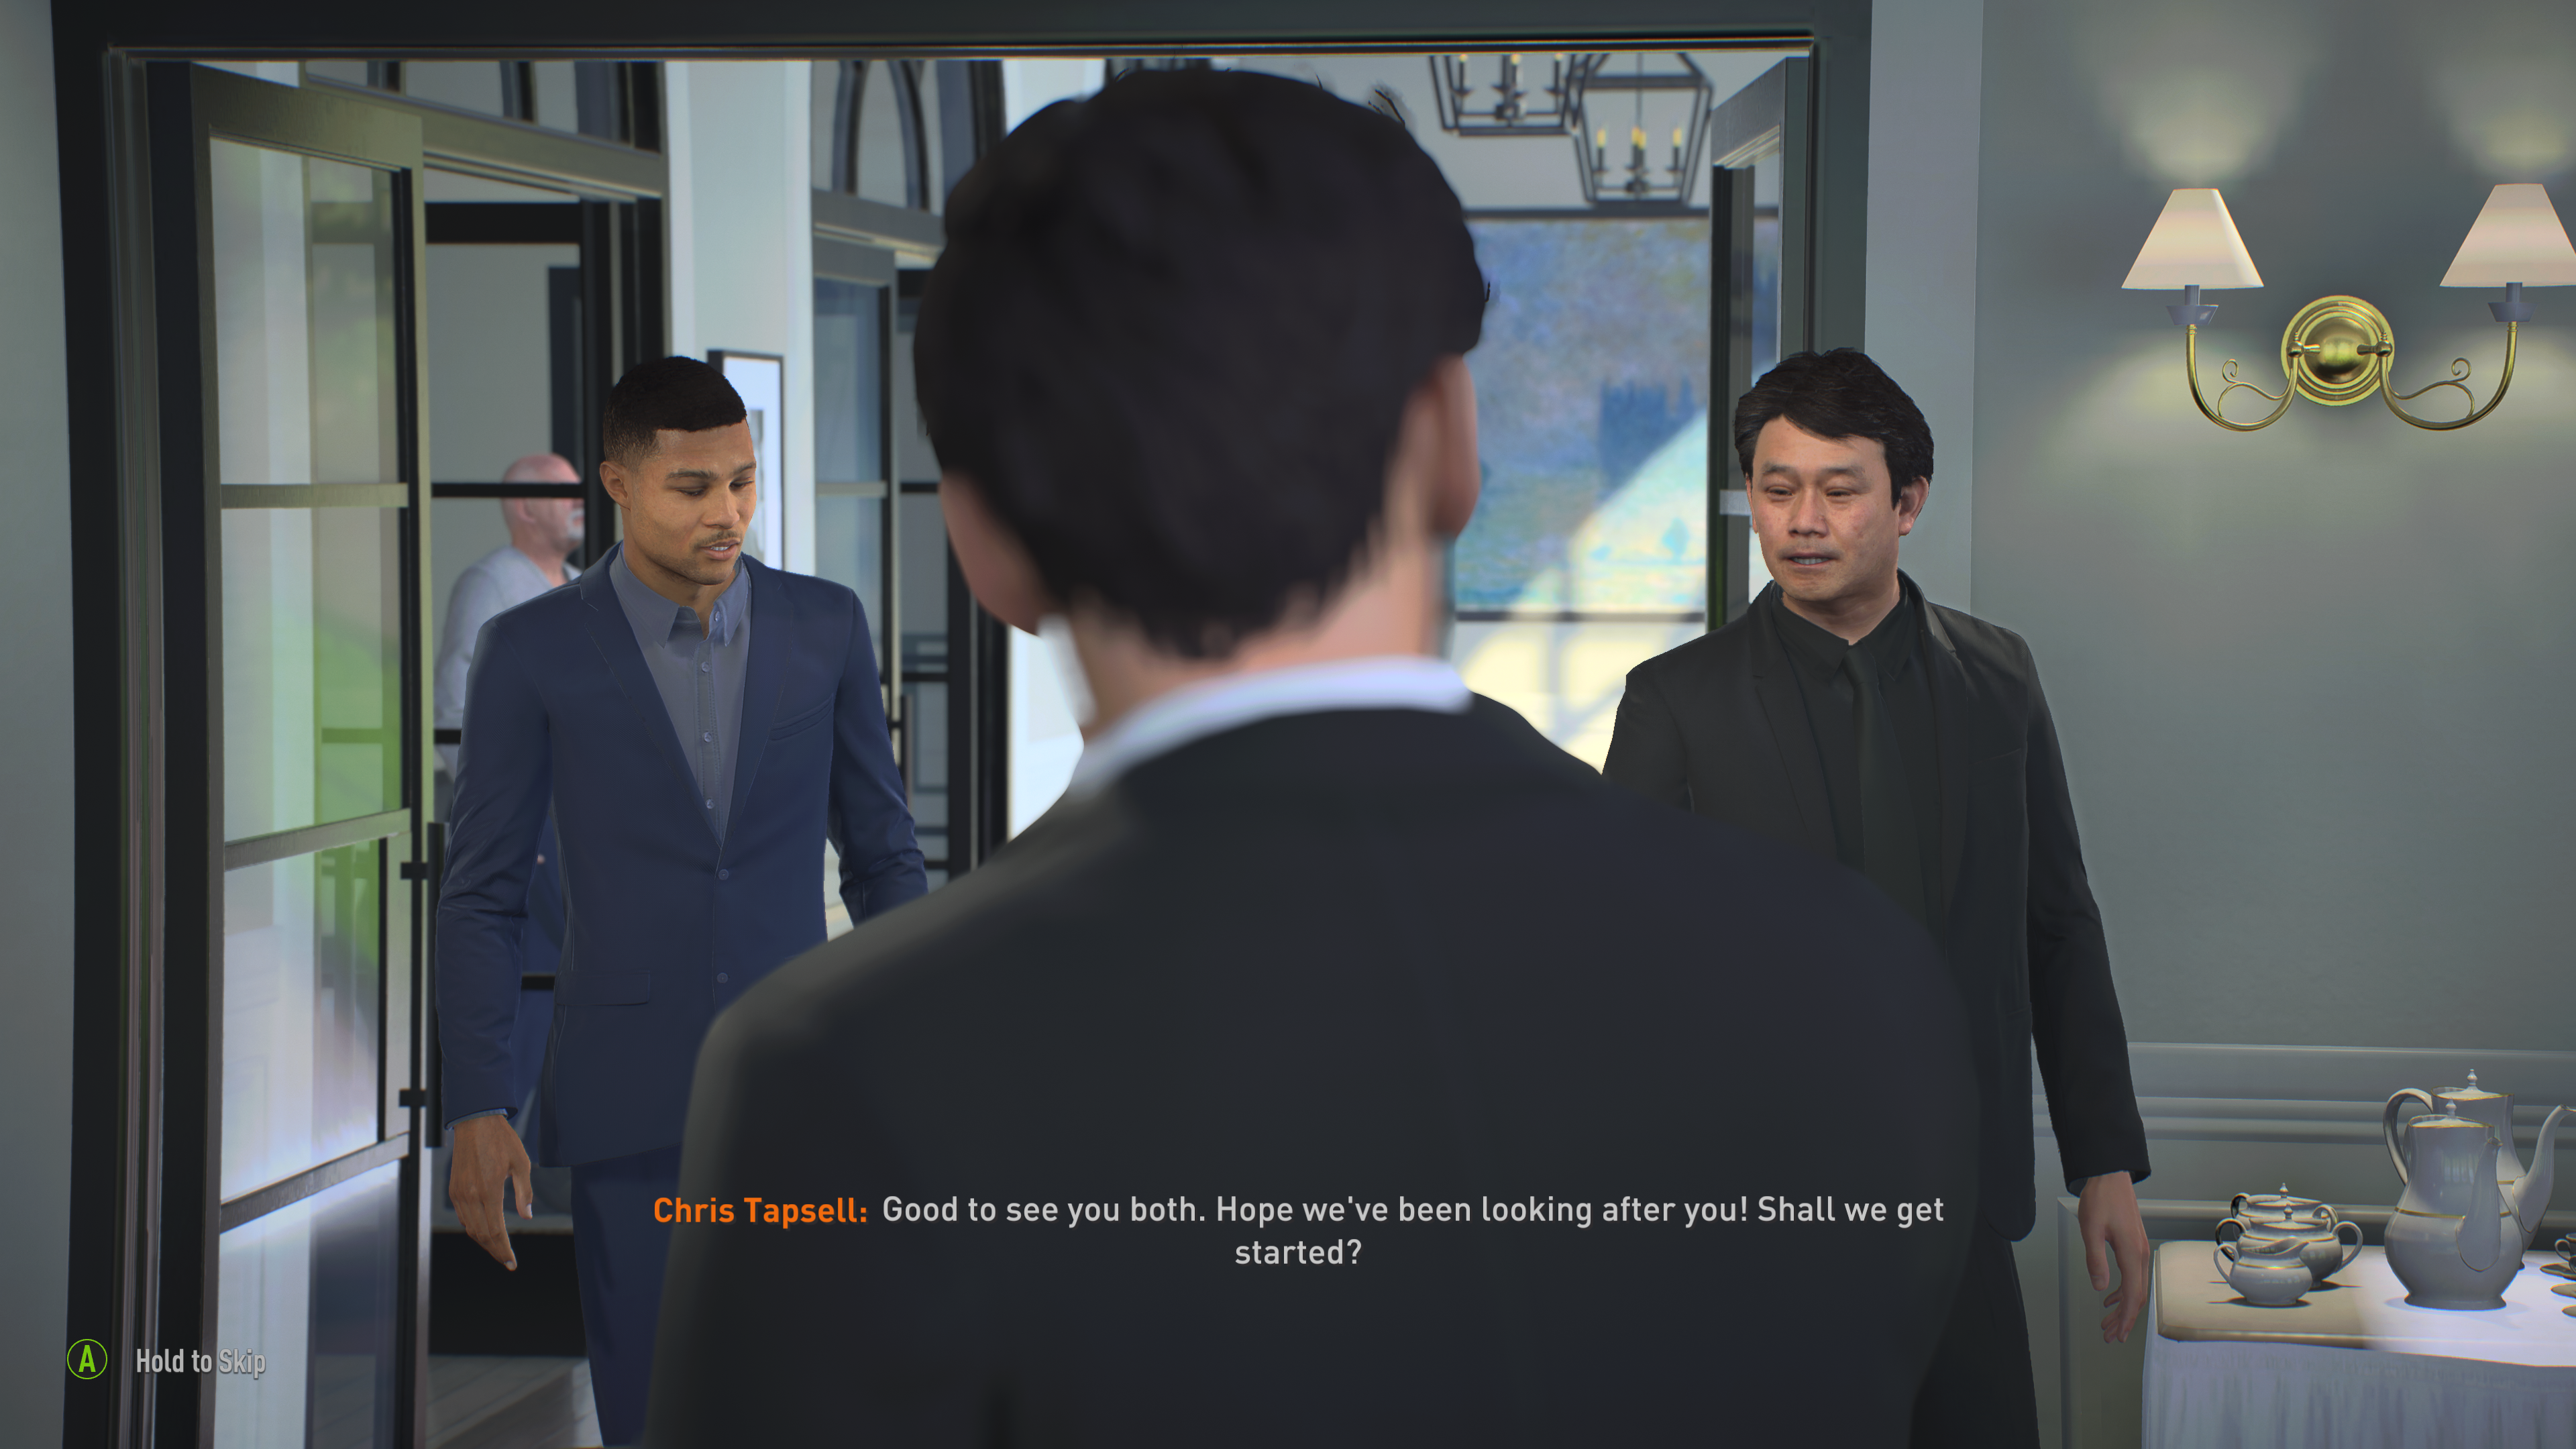 FIFA 23 review - career mode transfer negotiation cutscene showing Serge Gnabry and his agent walking into a fancy restaurant